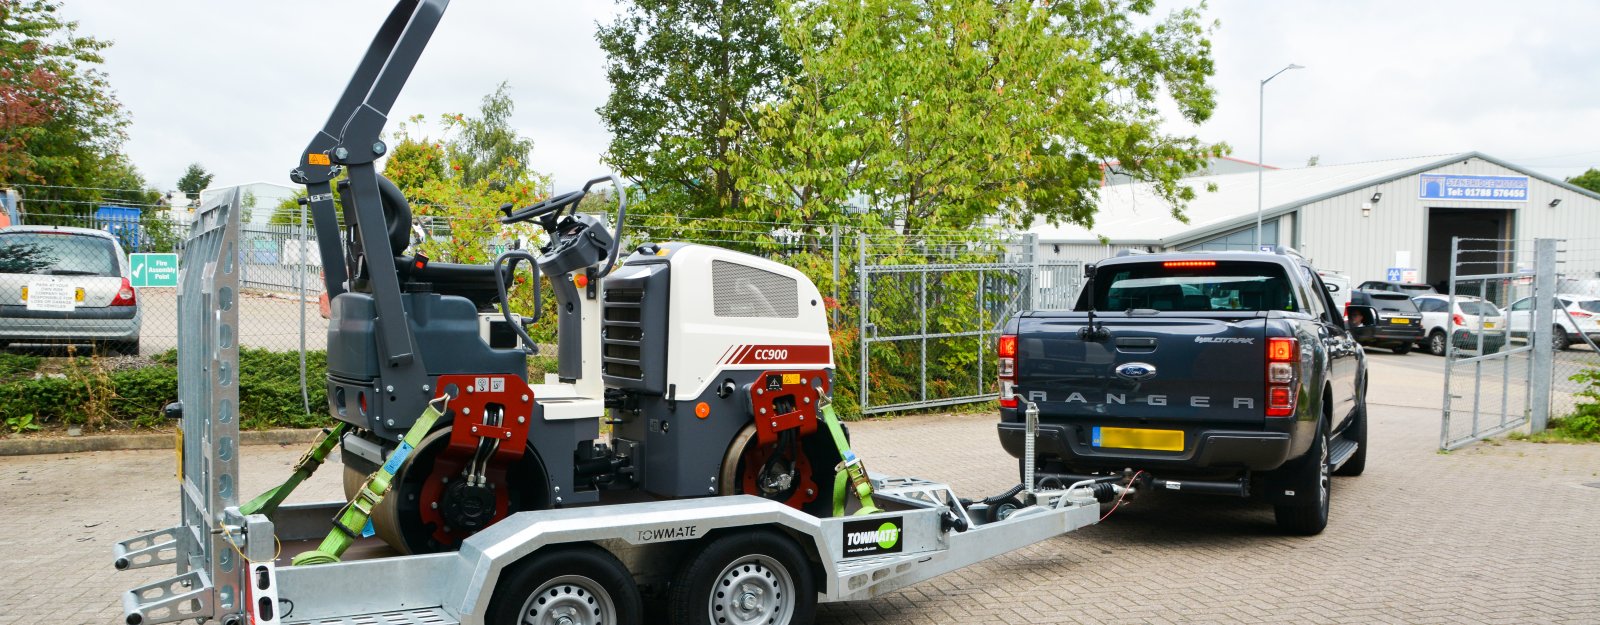 New dealer of Towmate trailers